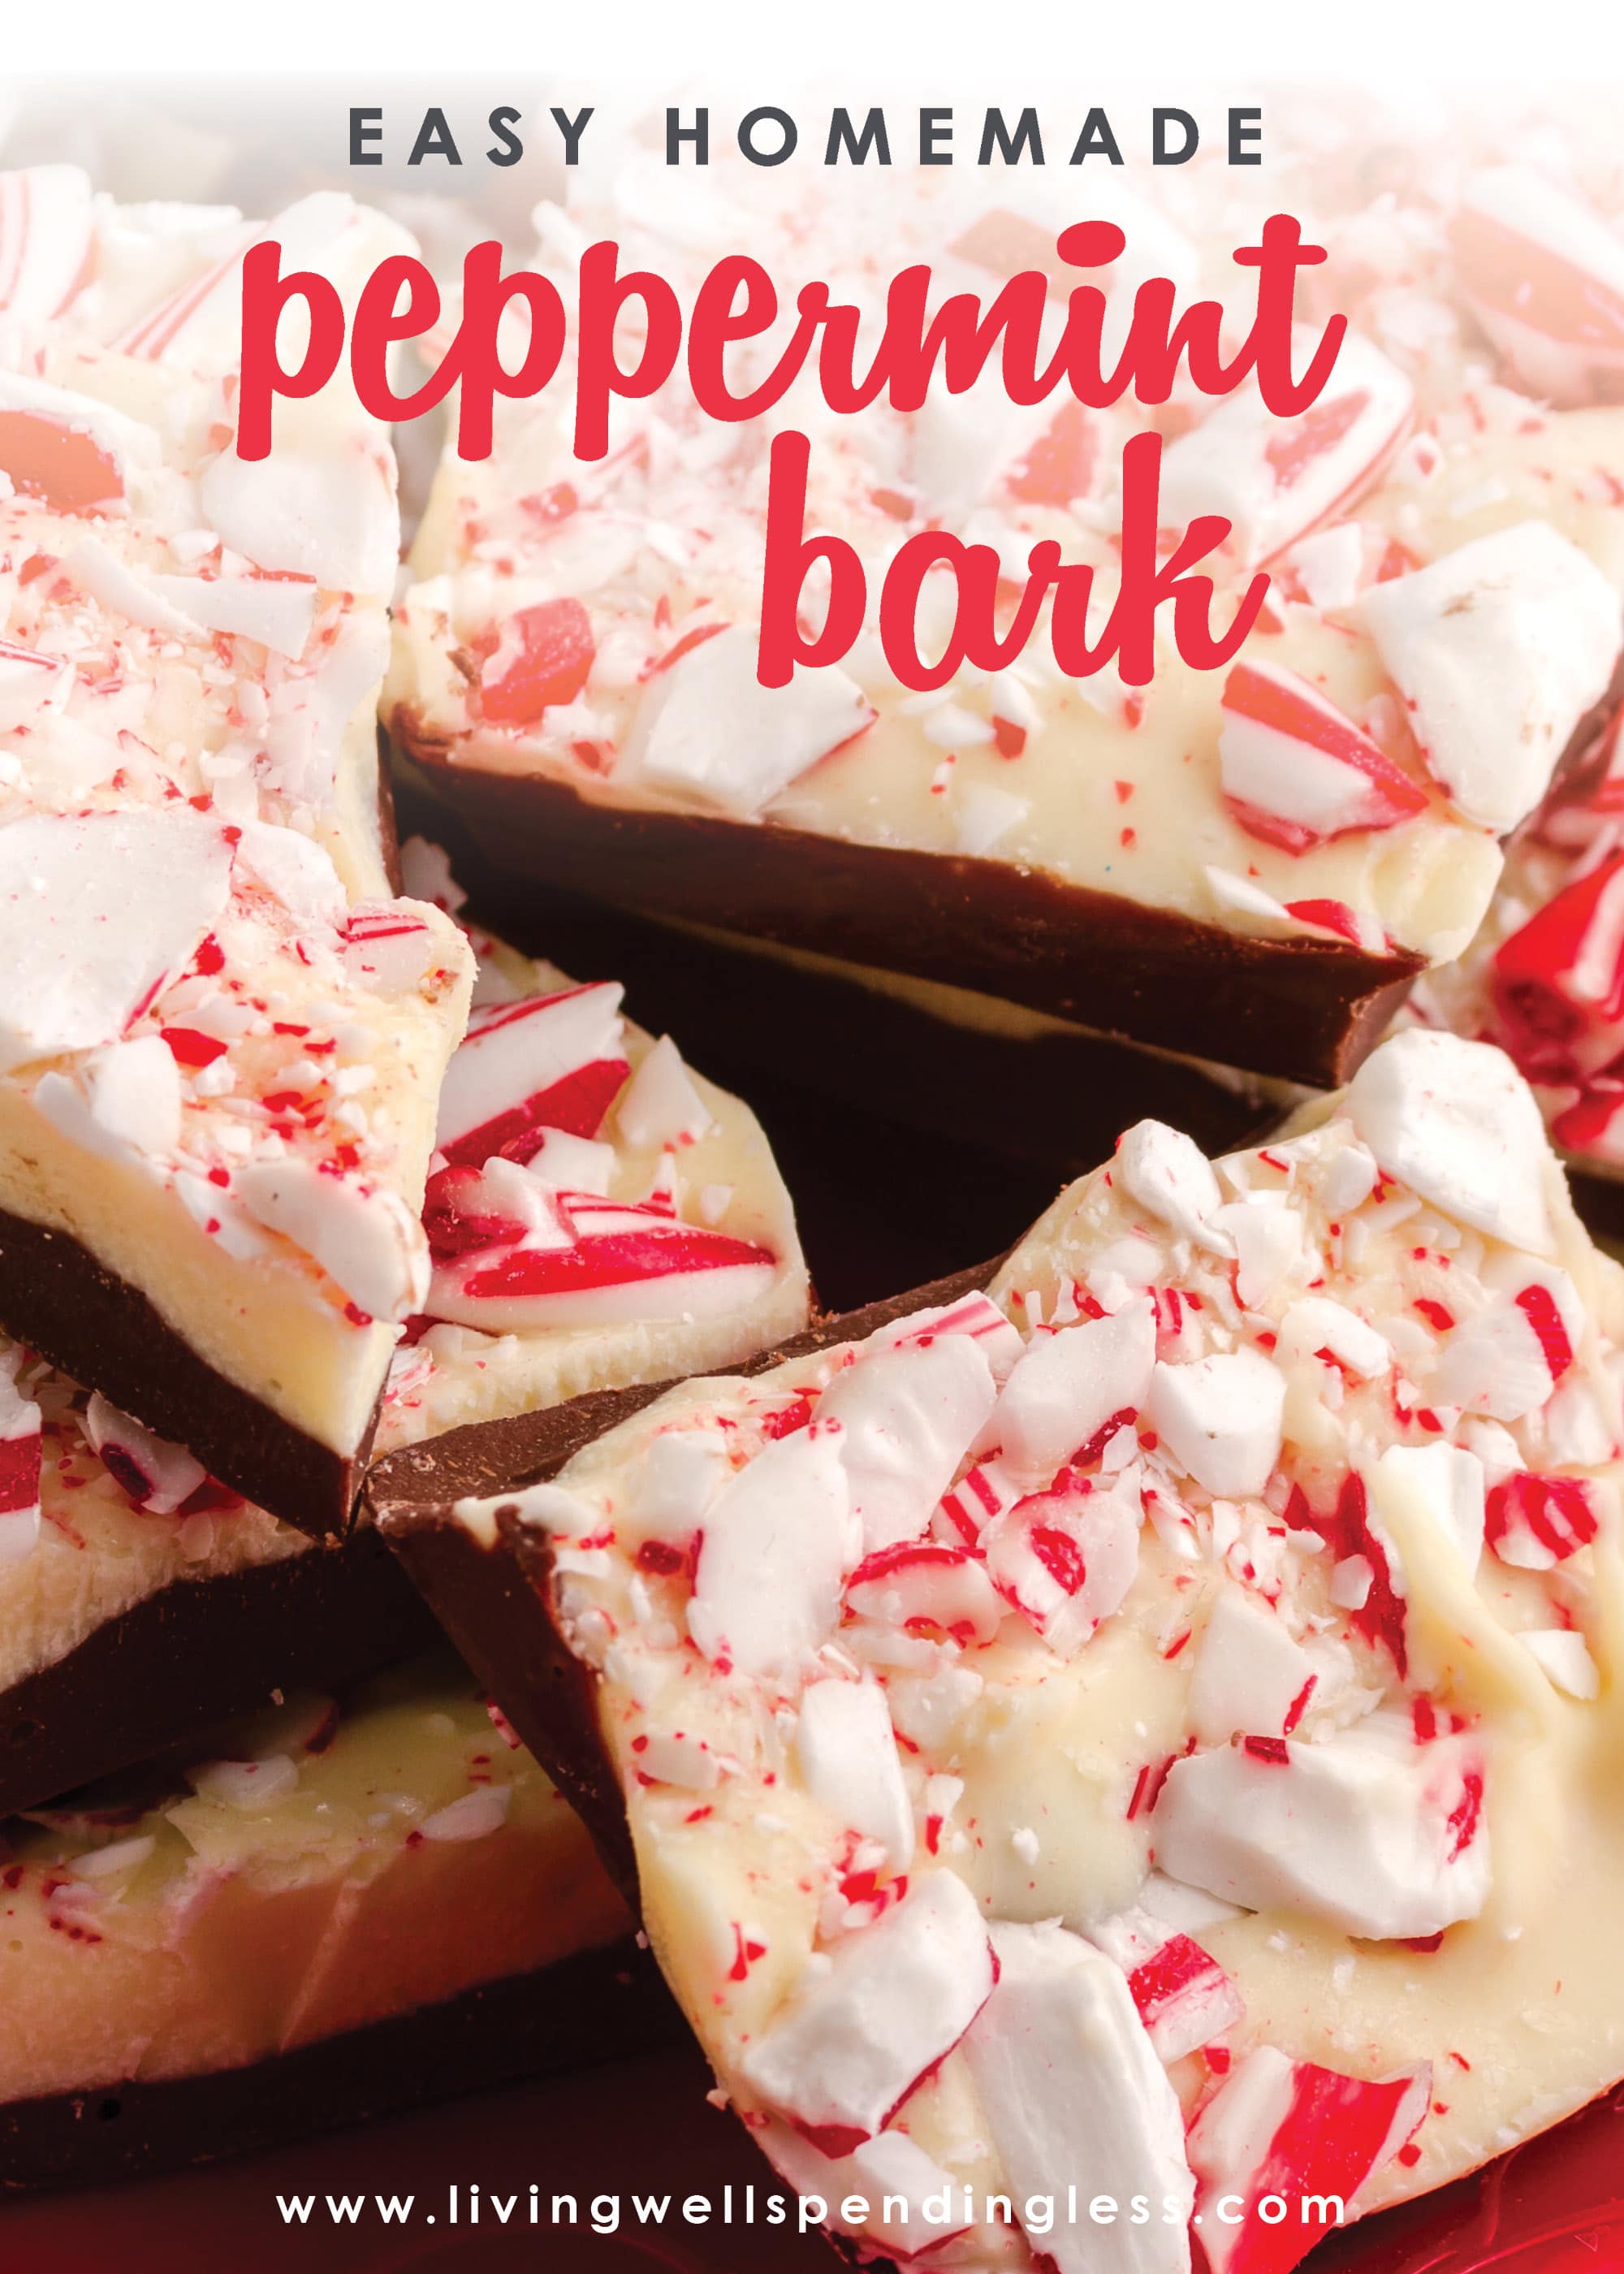 Looking for a sweet holiday treat to give that won't take all day? This homemade peppermint bark is easy to make and the perfect holiday gift! 